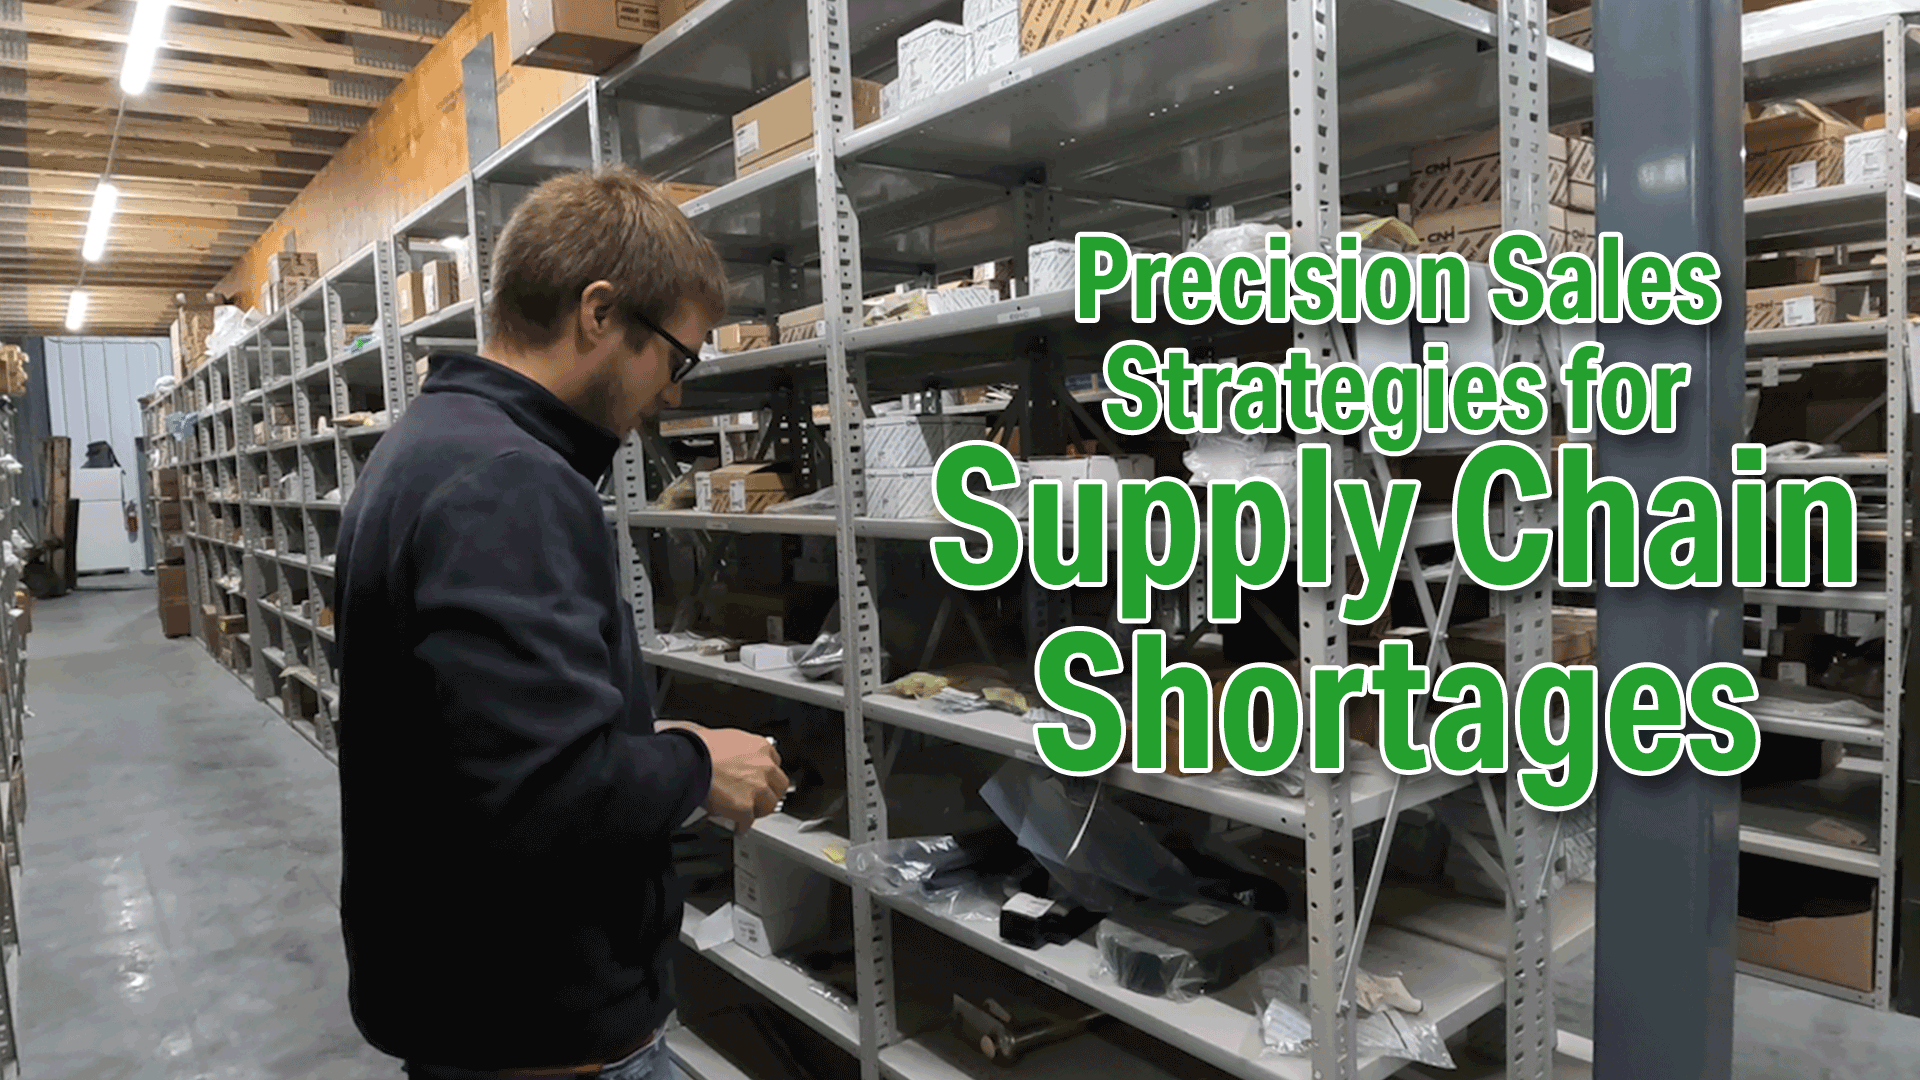 Precision-Sales-Strategies-for-Supply-Chain-Shortages.png